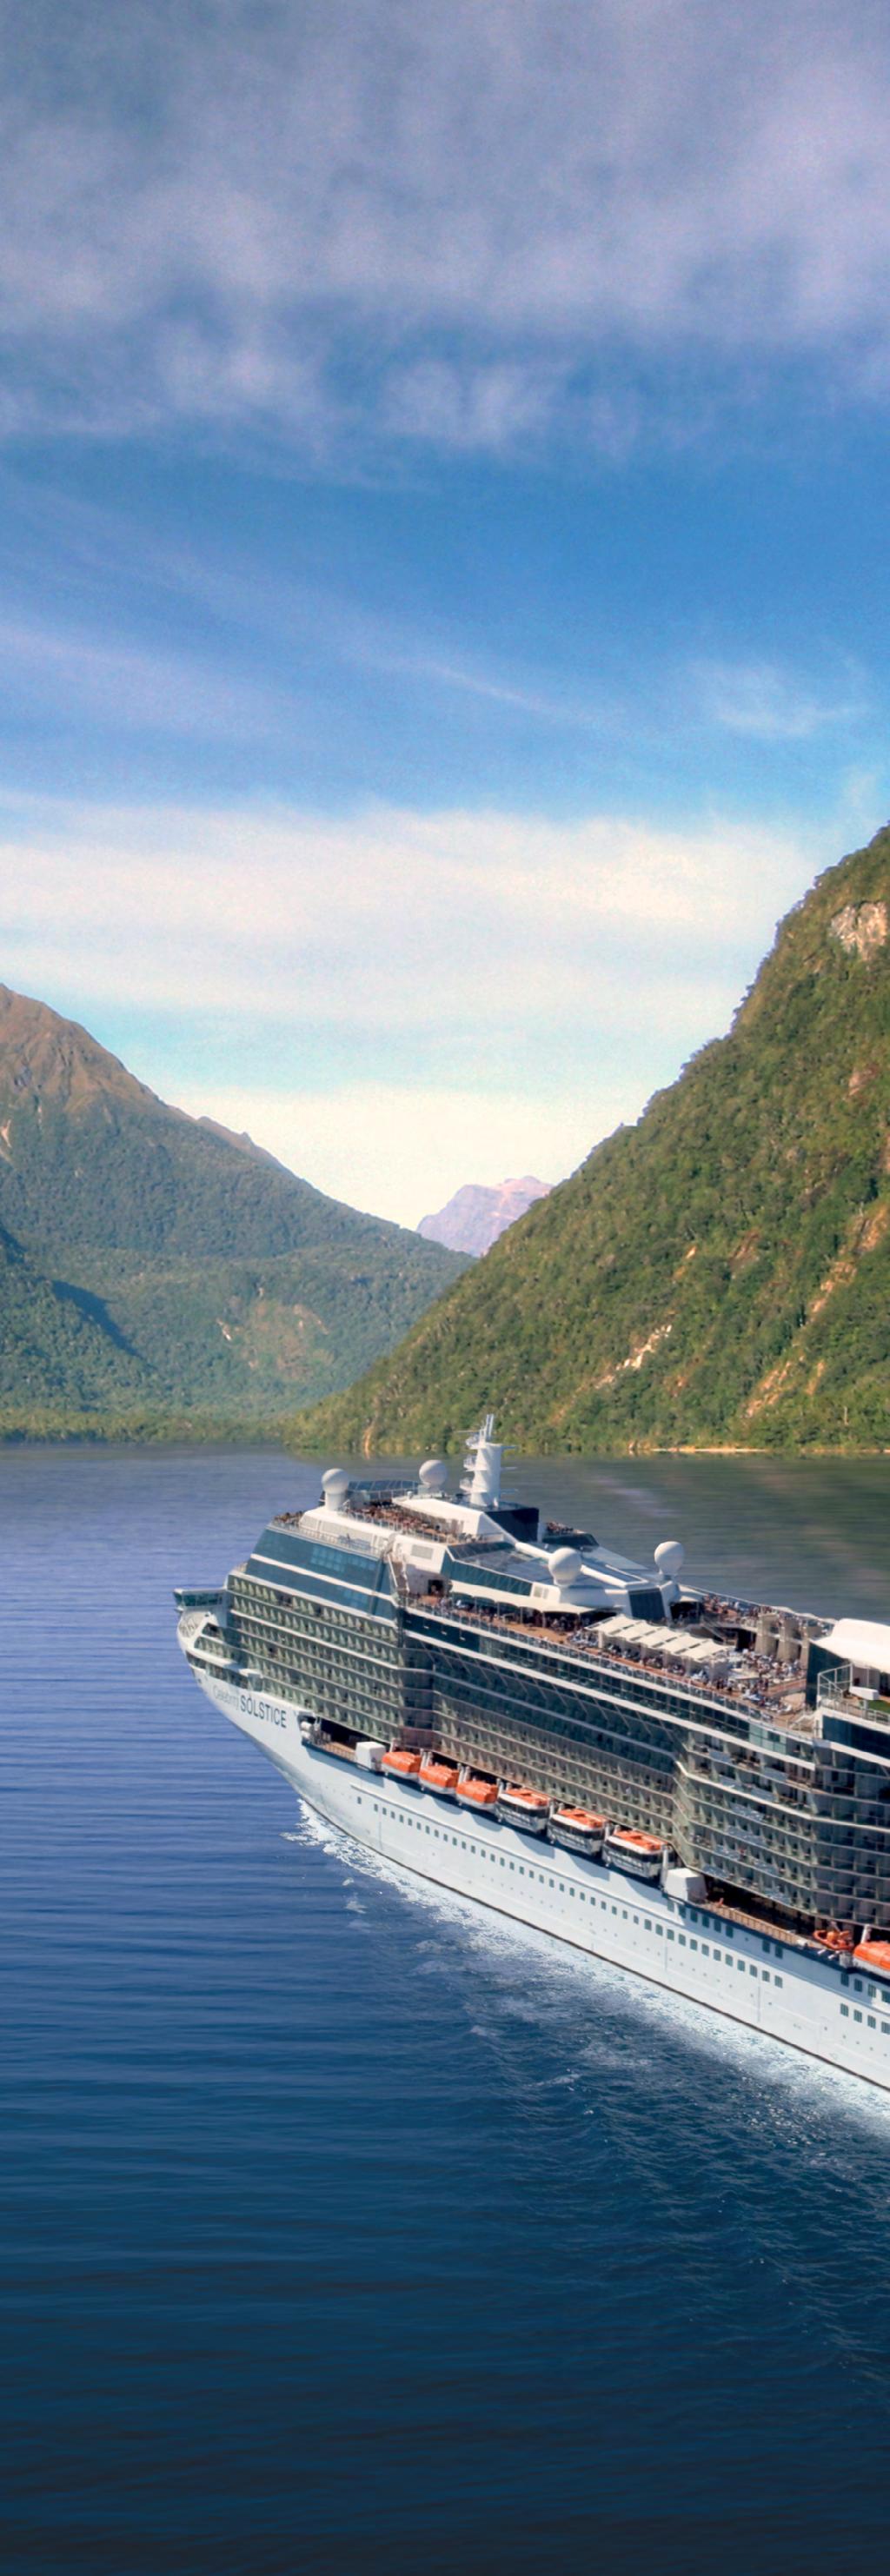 2019-20 AUSTRALIA, NEW ZEALAND AND SOUTH PACIFIC HIGHLIGHTS Discover the wonderful sights, sounds and flavours close to home when Celebrity Solstice returns in 2019-20, visiting more than 30